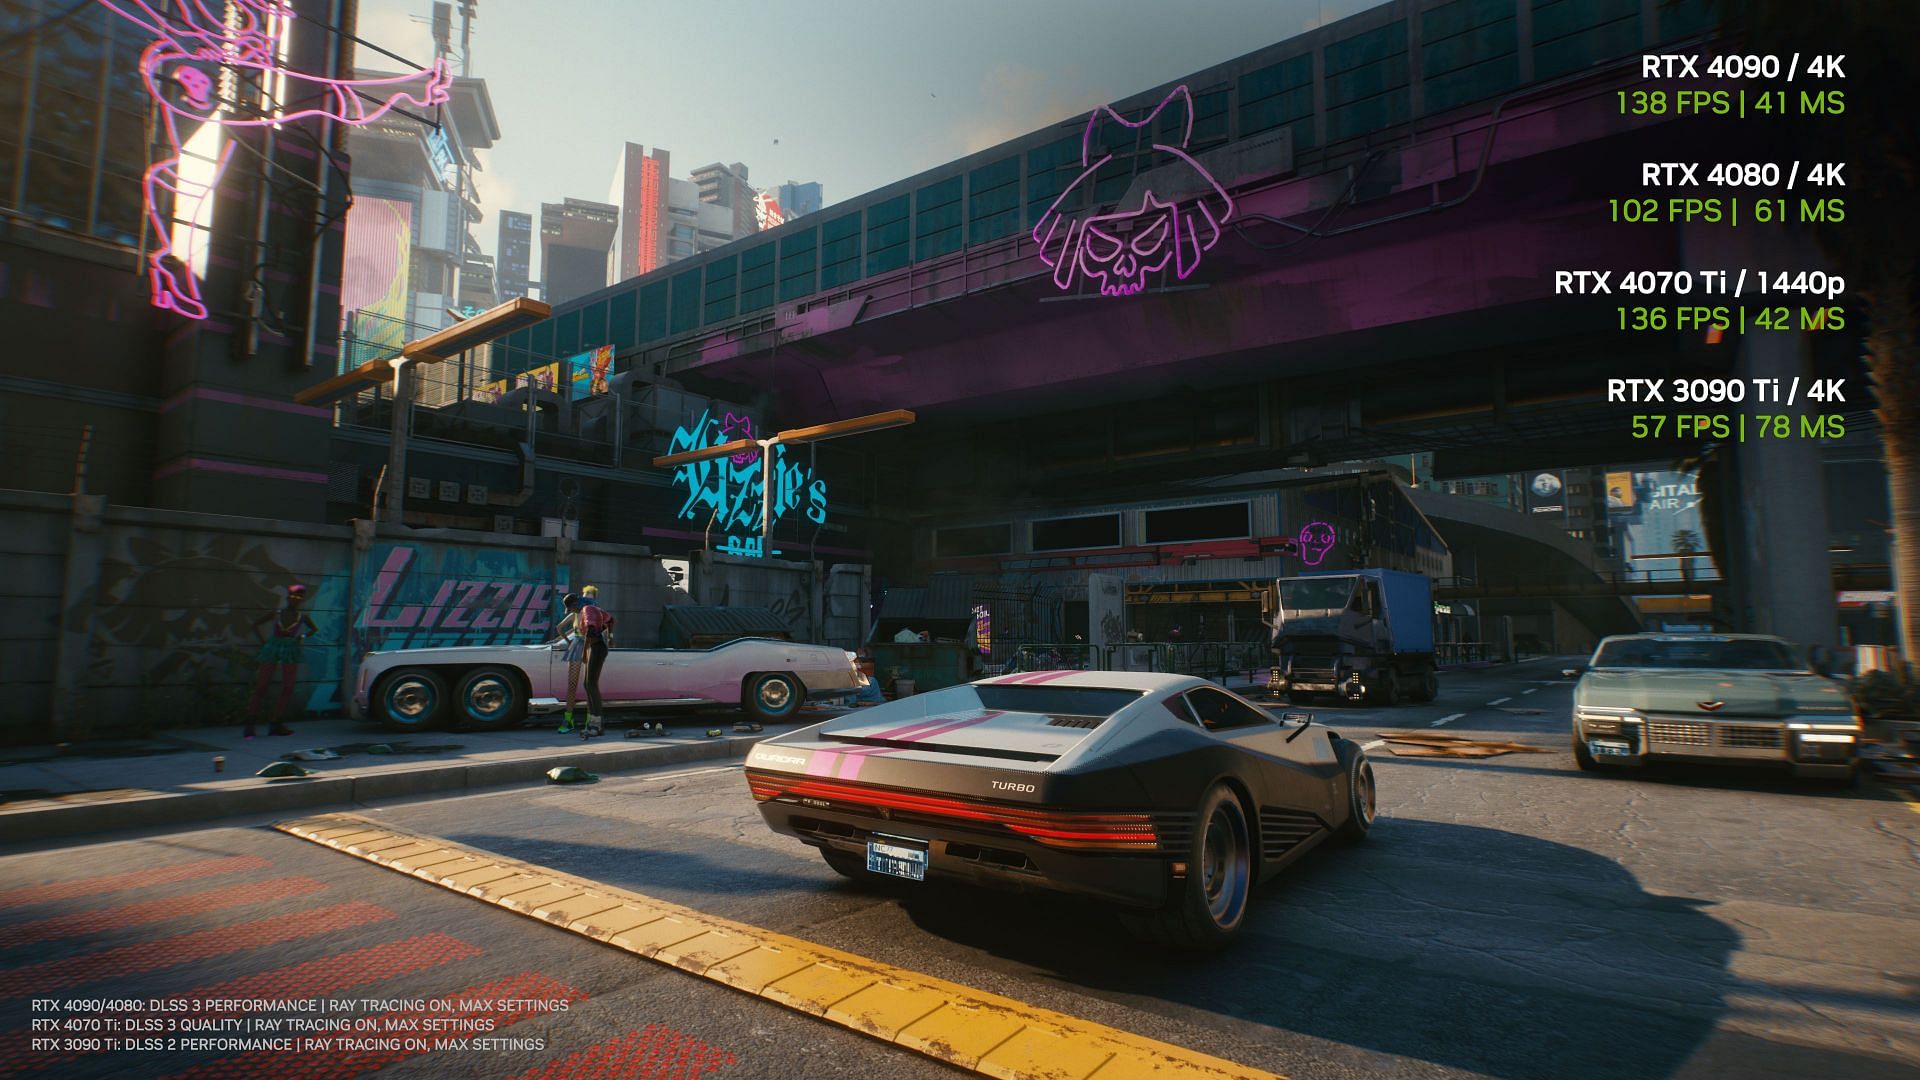 Performance metrics with various Nvidia RTX video cards in Cyberpunk 2077 (Image via Nvidia)